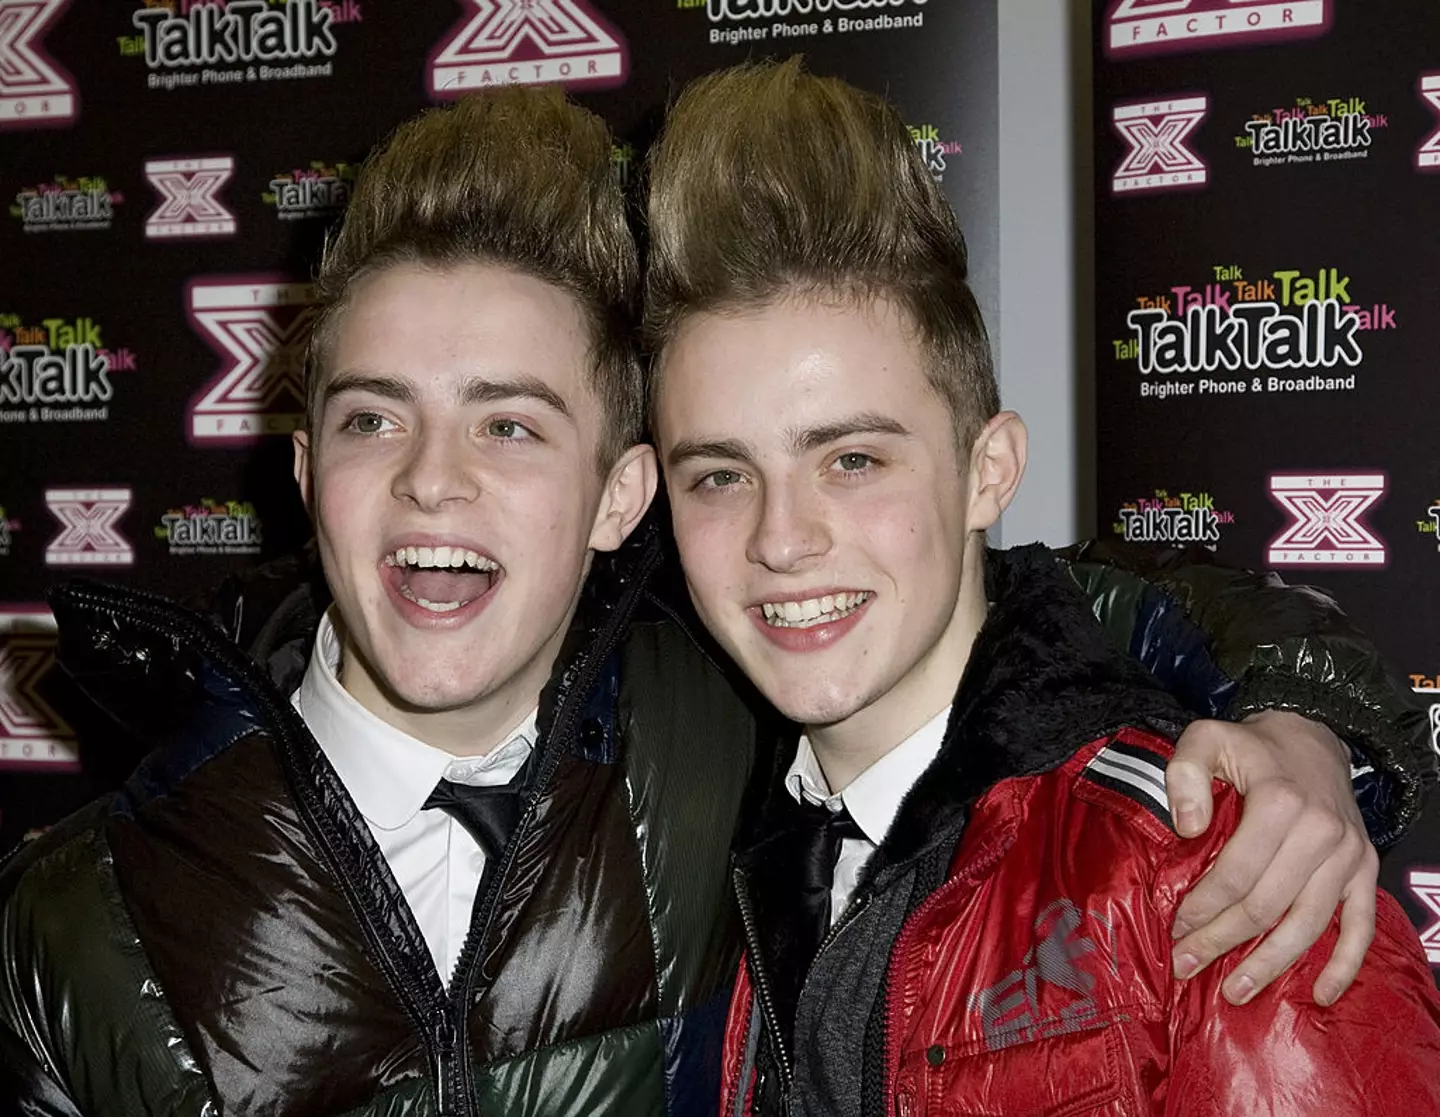 Louis worked with Jedward on The X Factor.